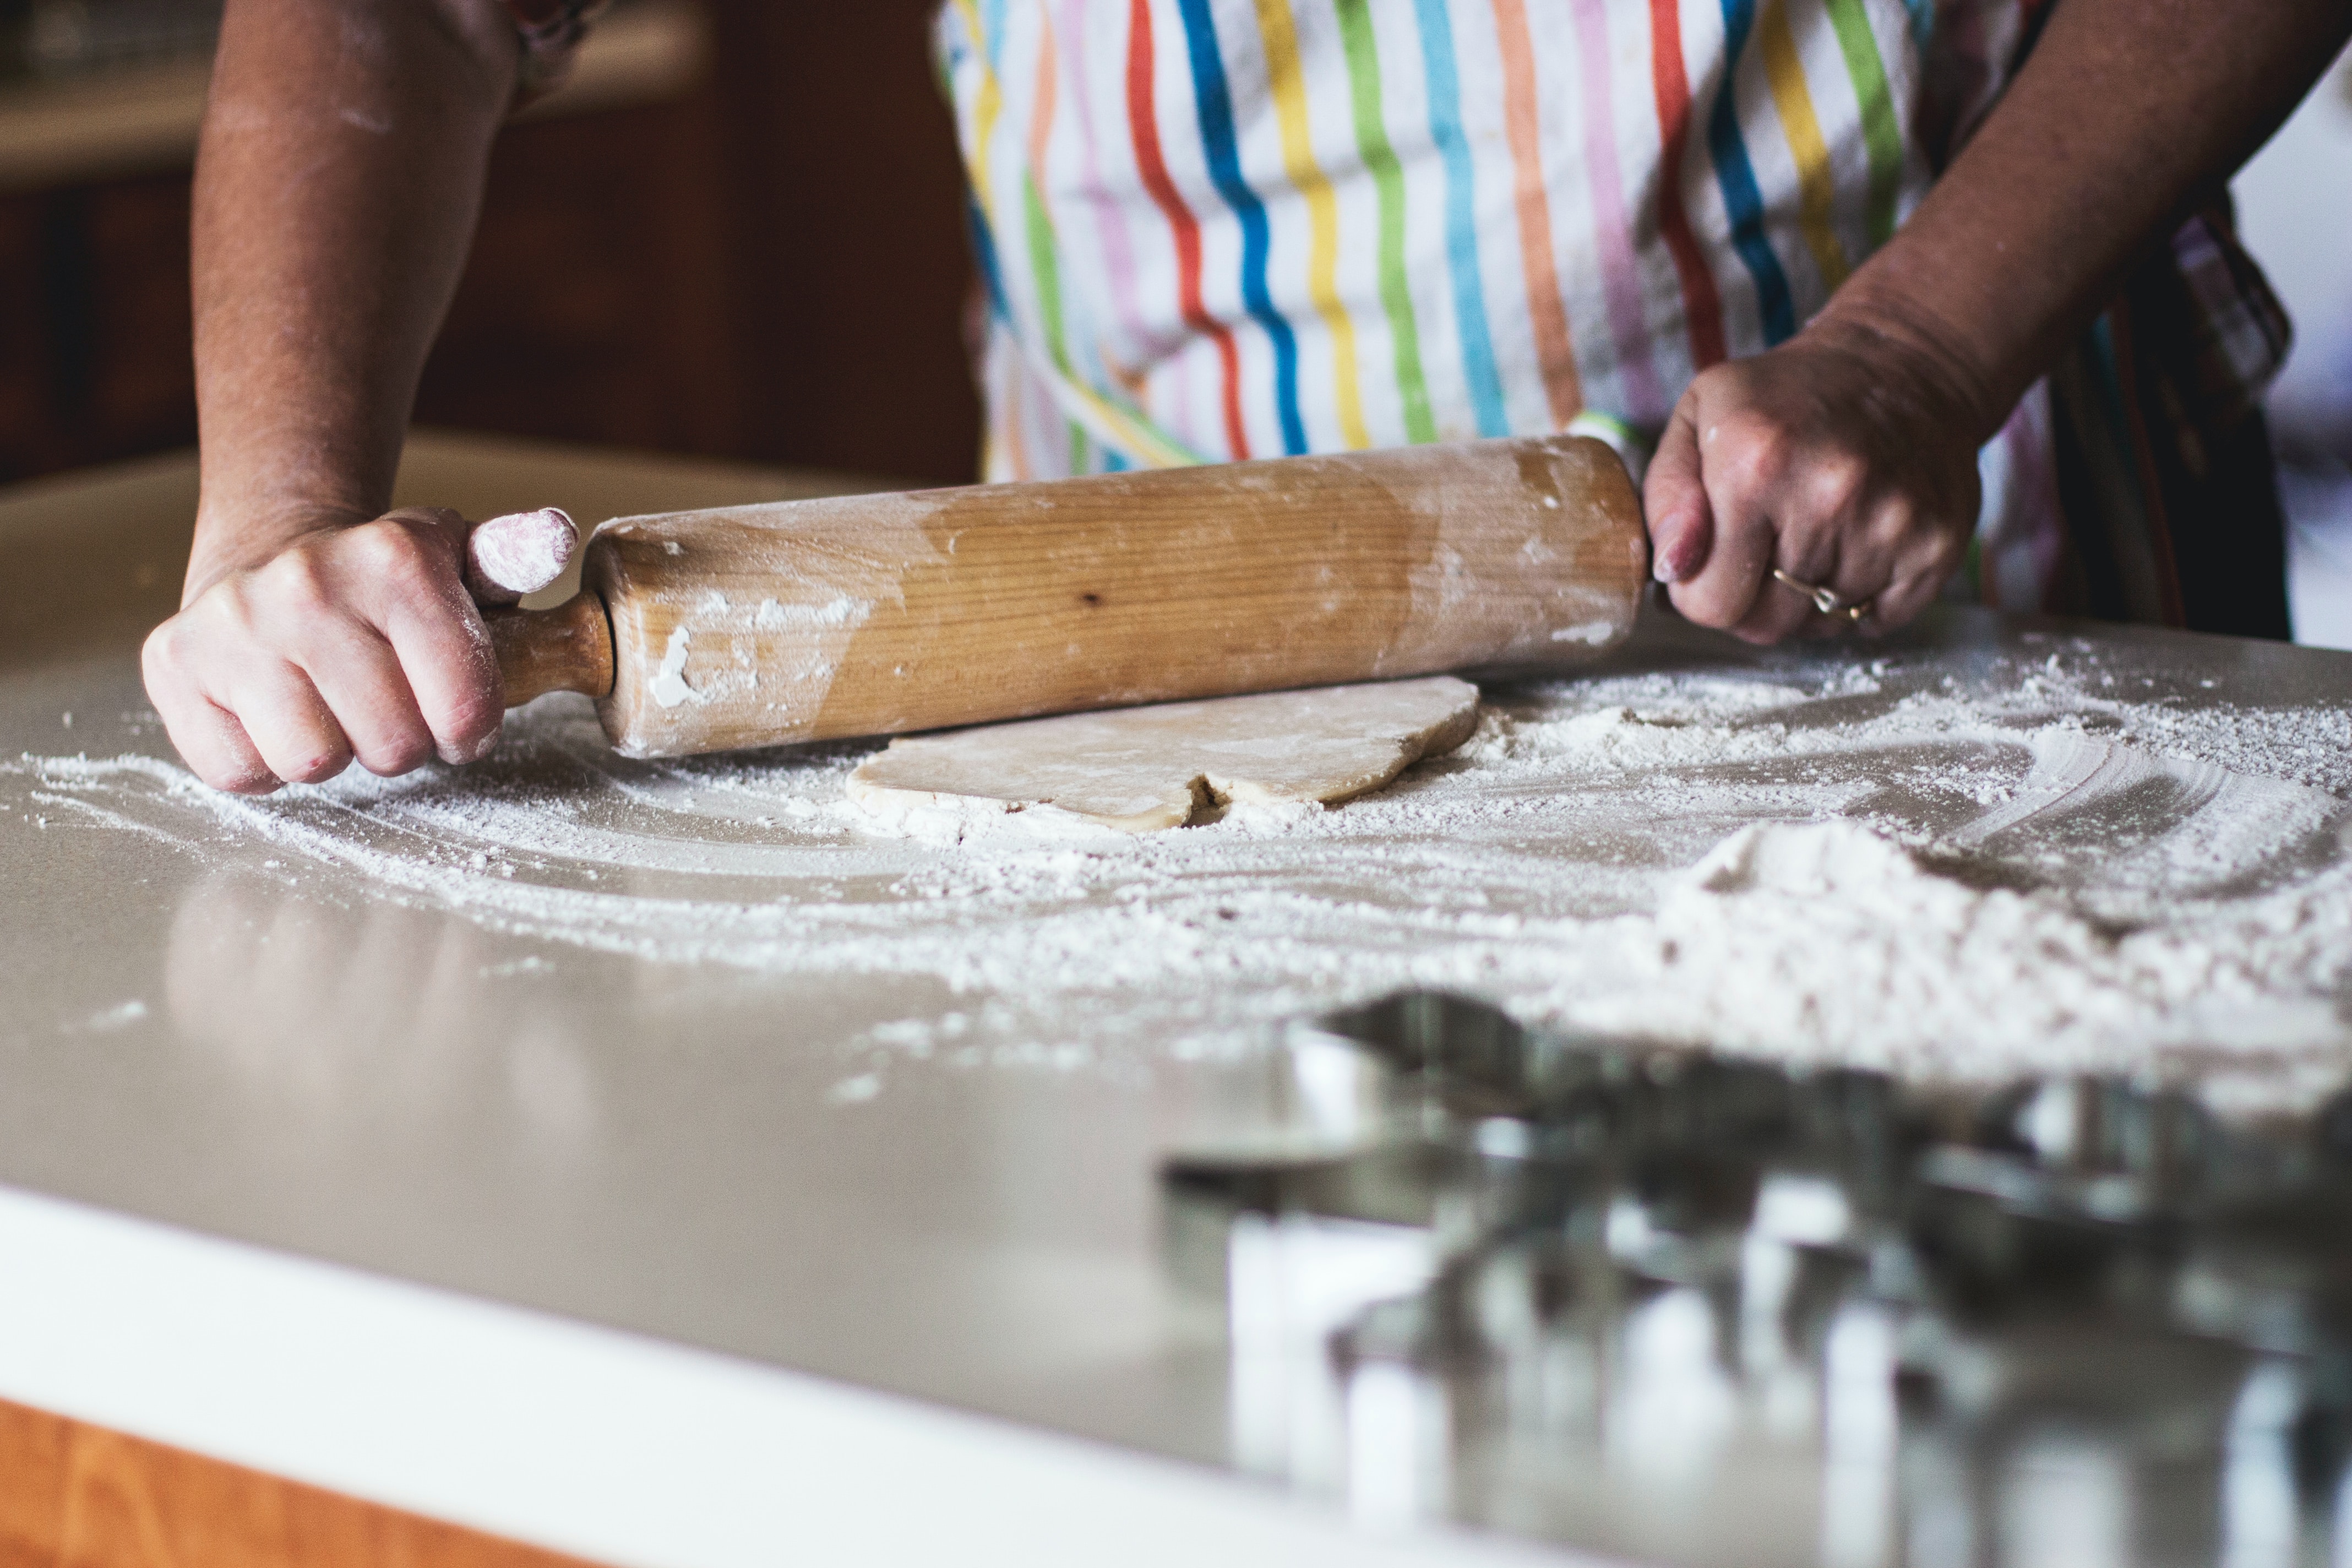 Stock image of someone rolling dough out